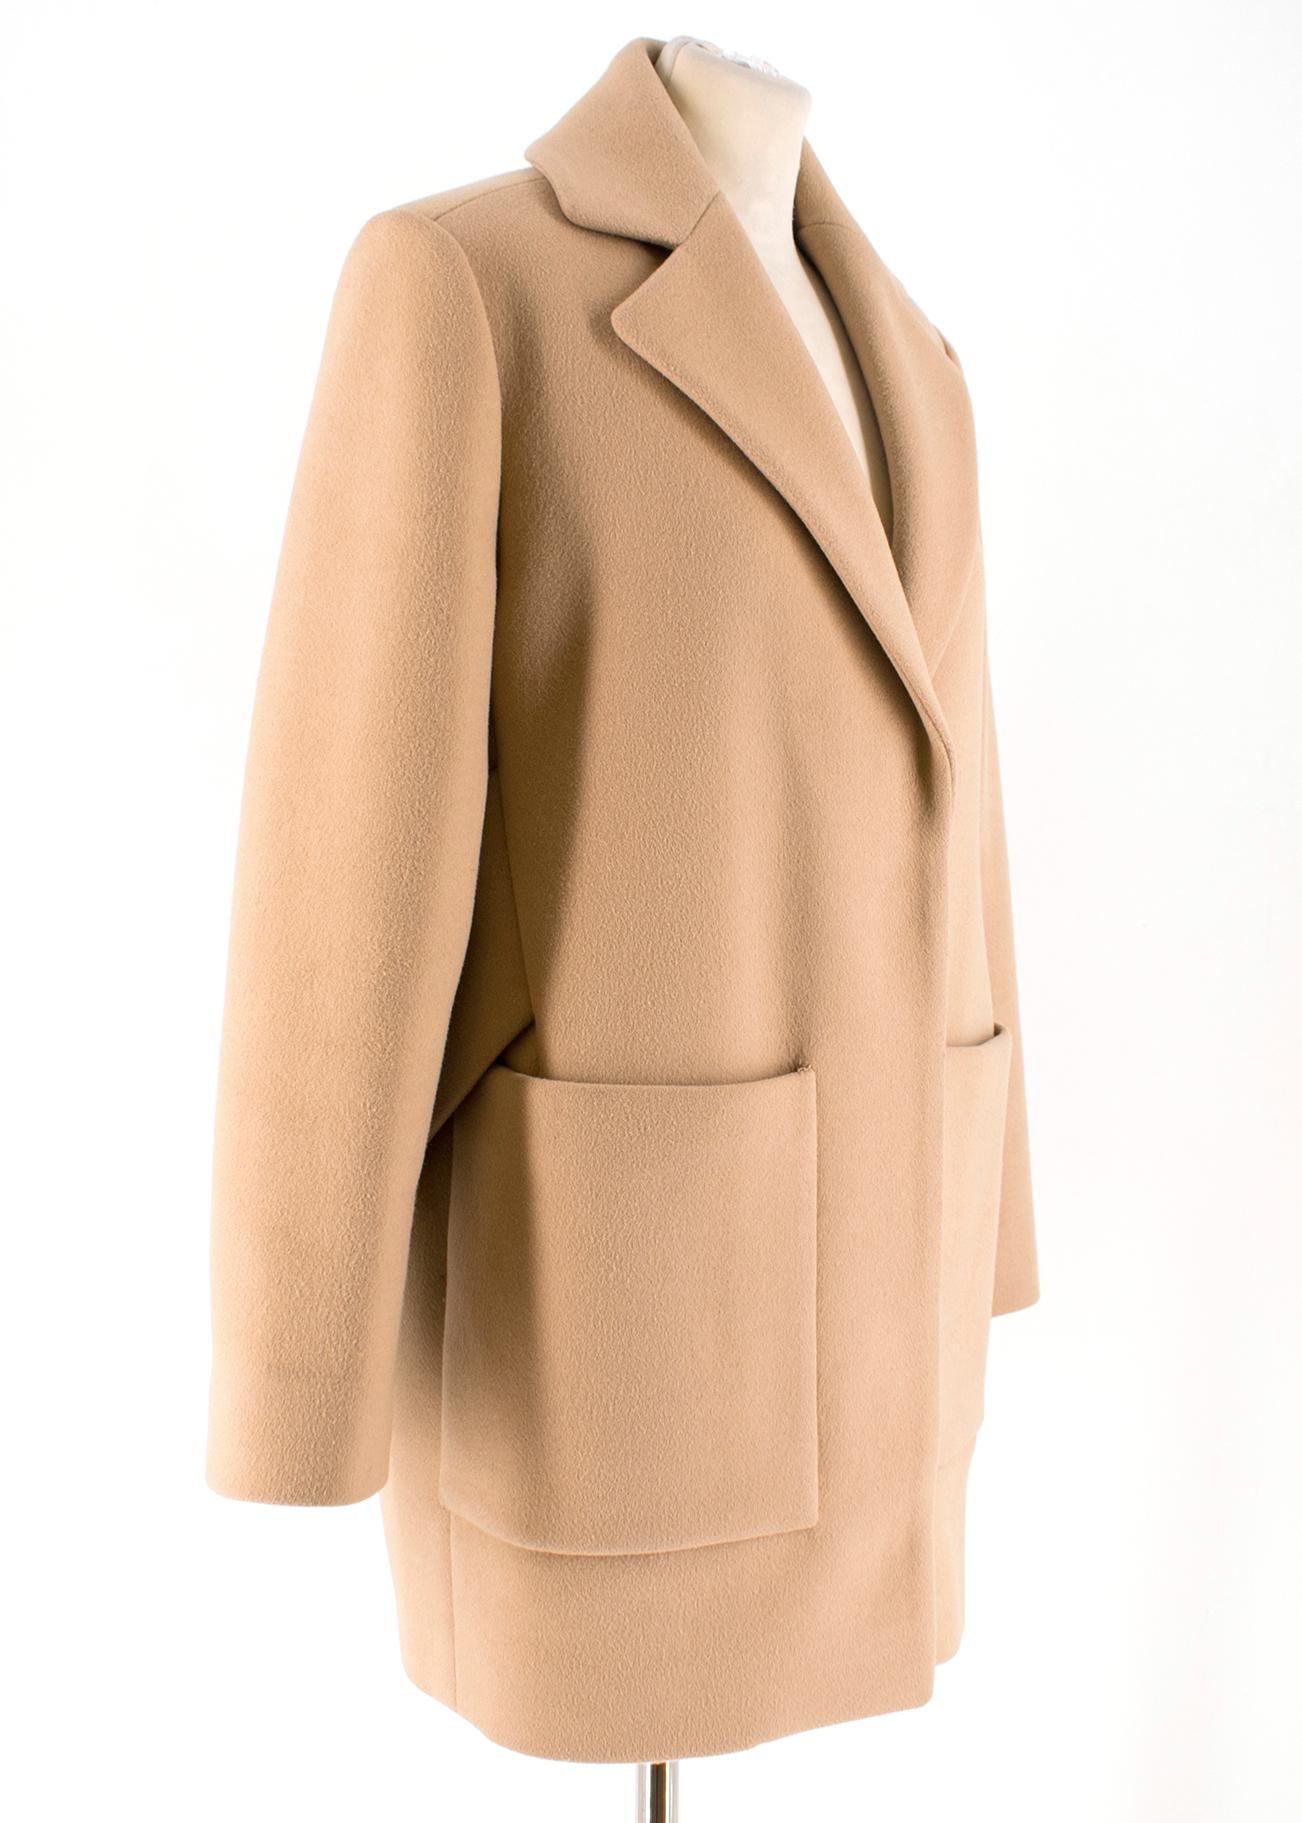 Balenciaga Camel Wool Coat

-Camel wool coat with tortoiseshell buttons
-Two front pockets
-Features back belt
-Shoulder pads
-Notched lapels

Please note, these items are pre-owned and may show signs of being stored even when unworn and unused.